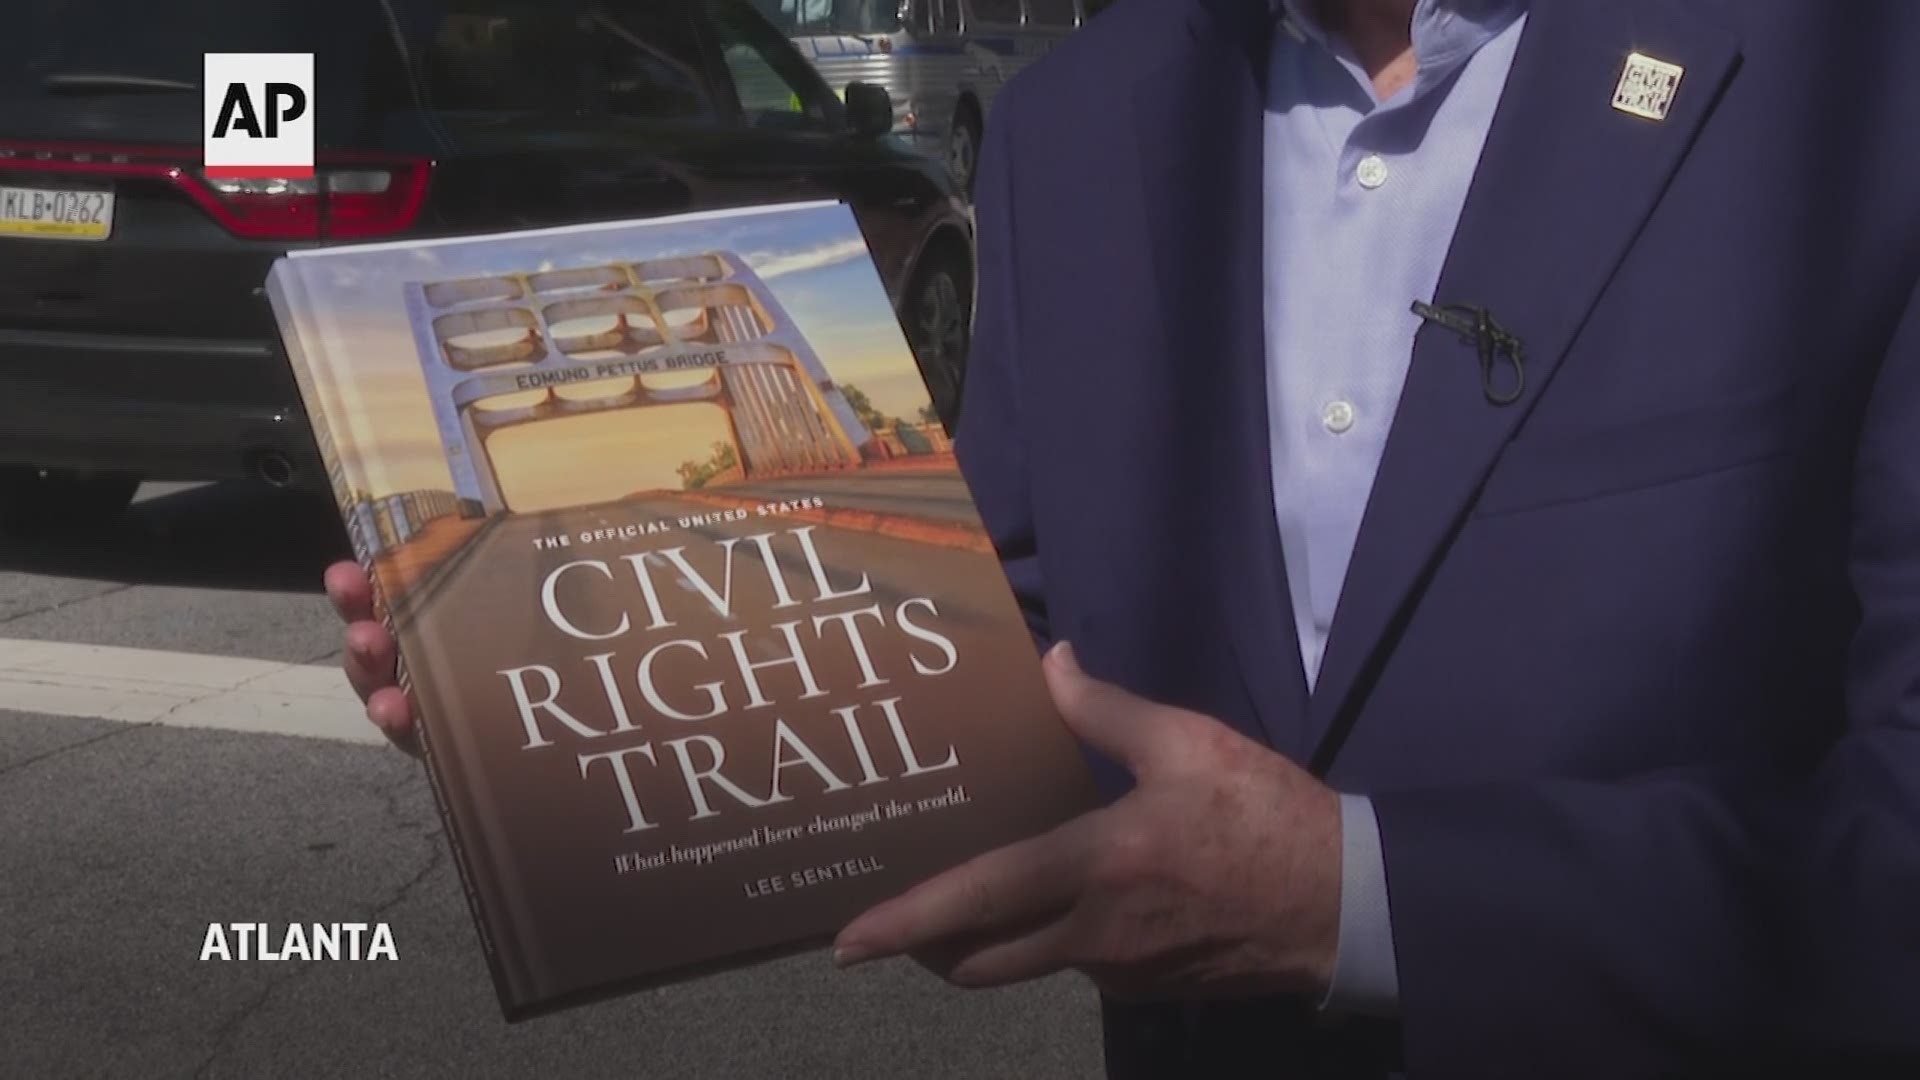 The book guides readers through 120 different civil rights landmarks across 14 different cities.